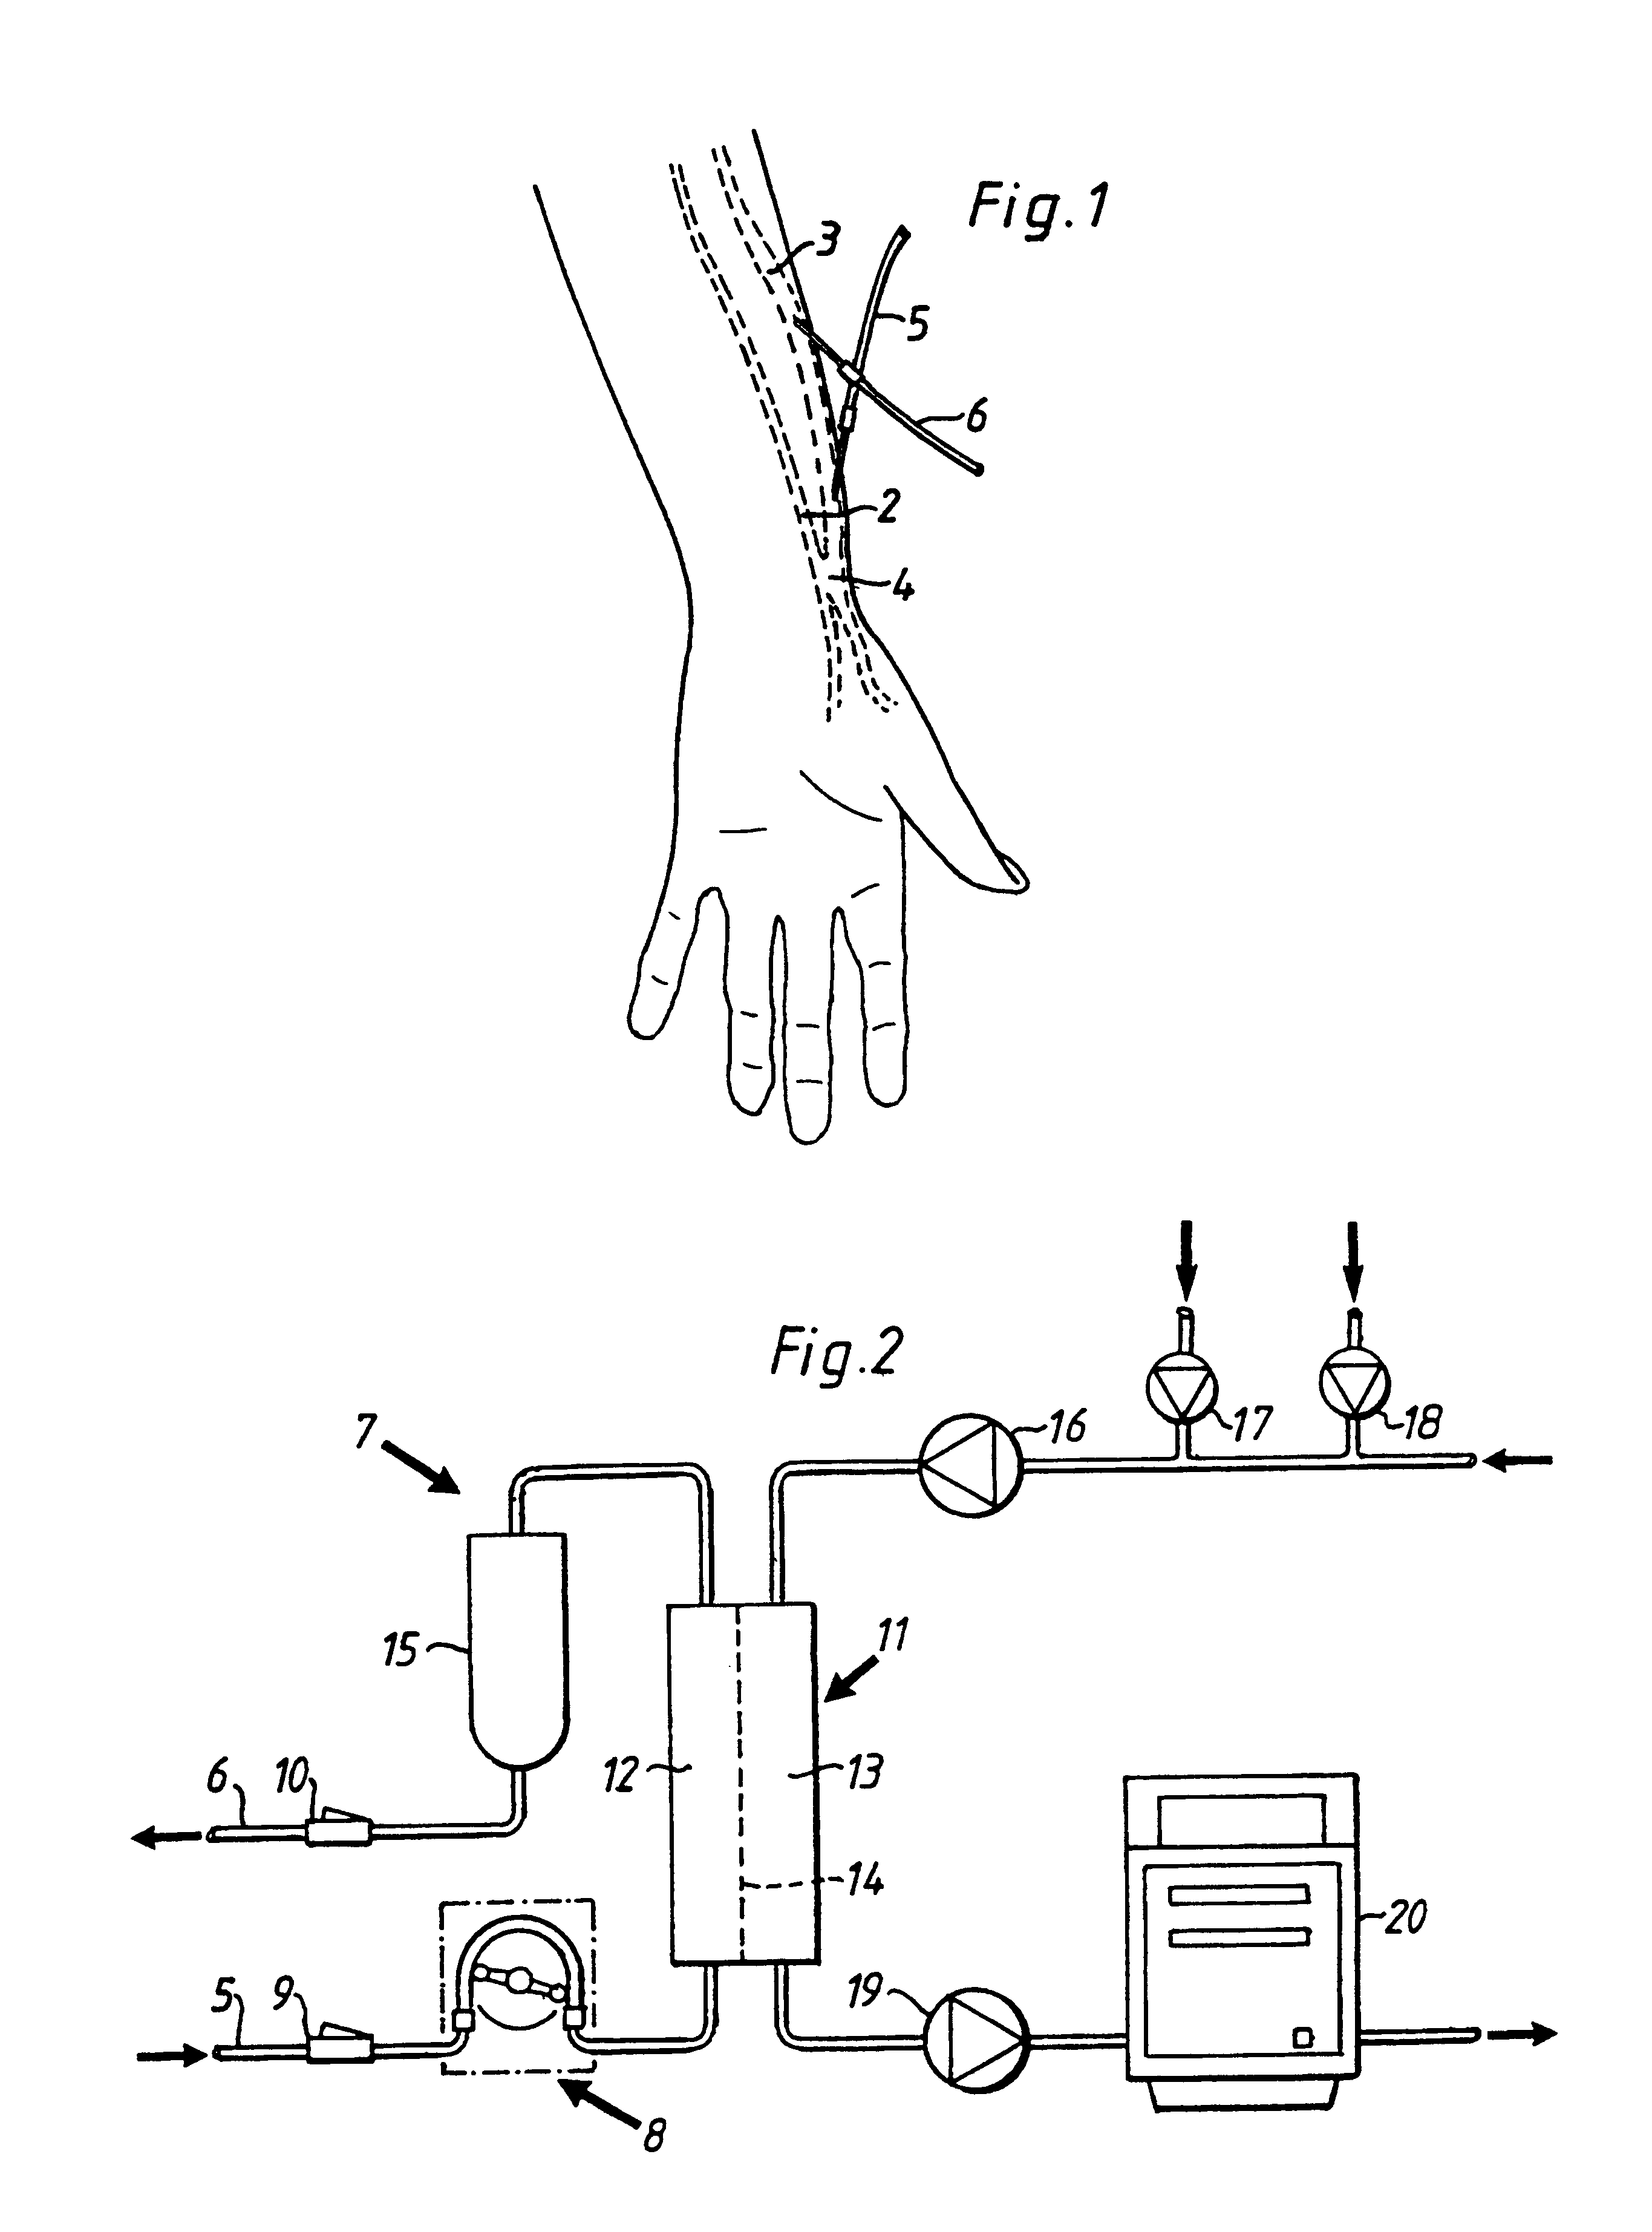 Method and device for measuring access flow